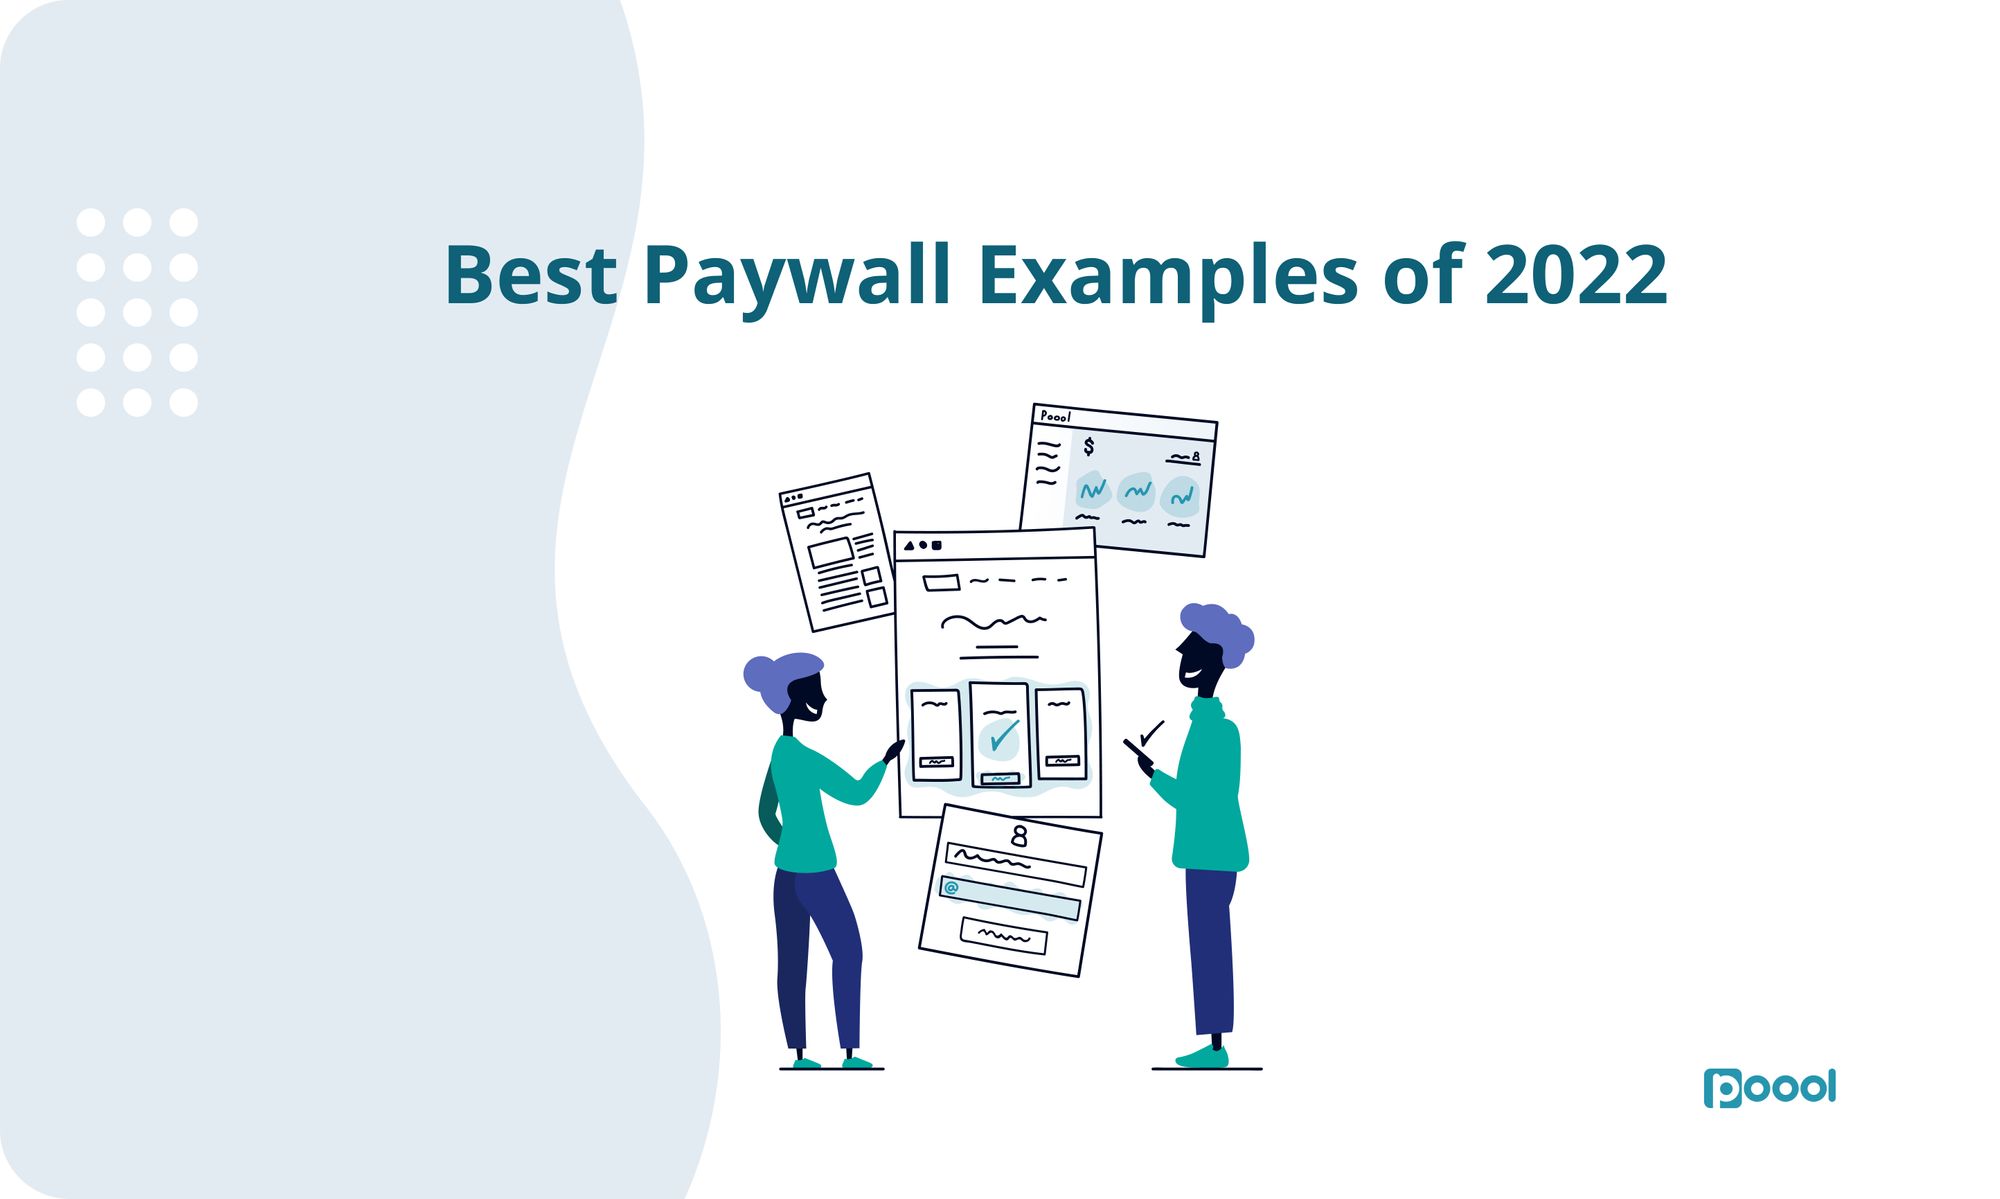 Best Paywall Examples of 2022.